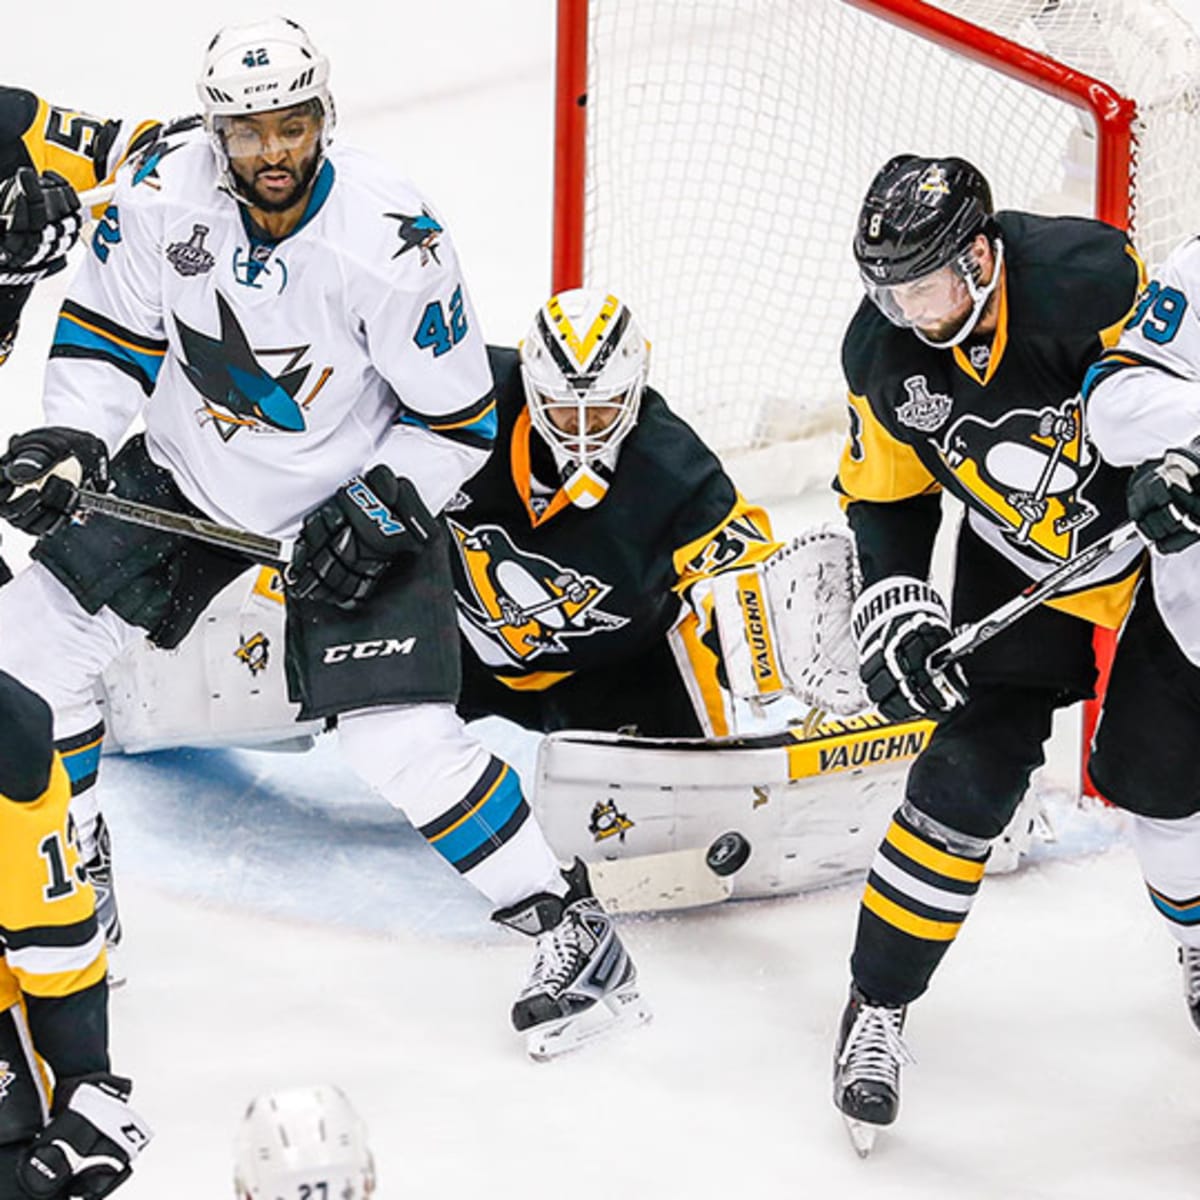 Penguins Finish Off Sharks to Win Stanley Cup - The New York Times